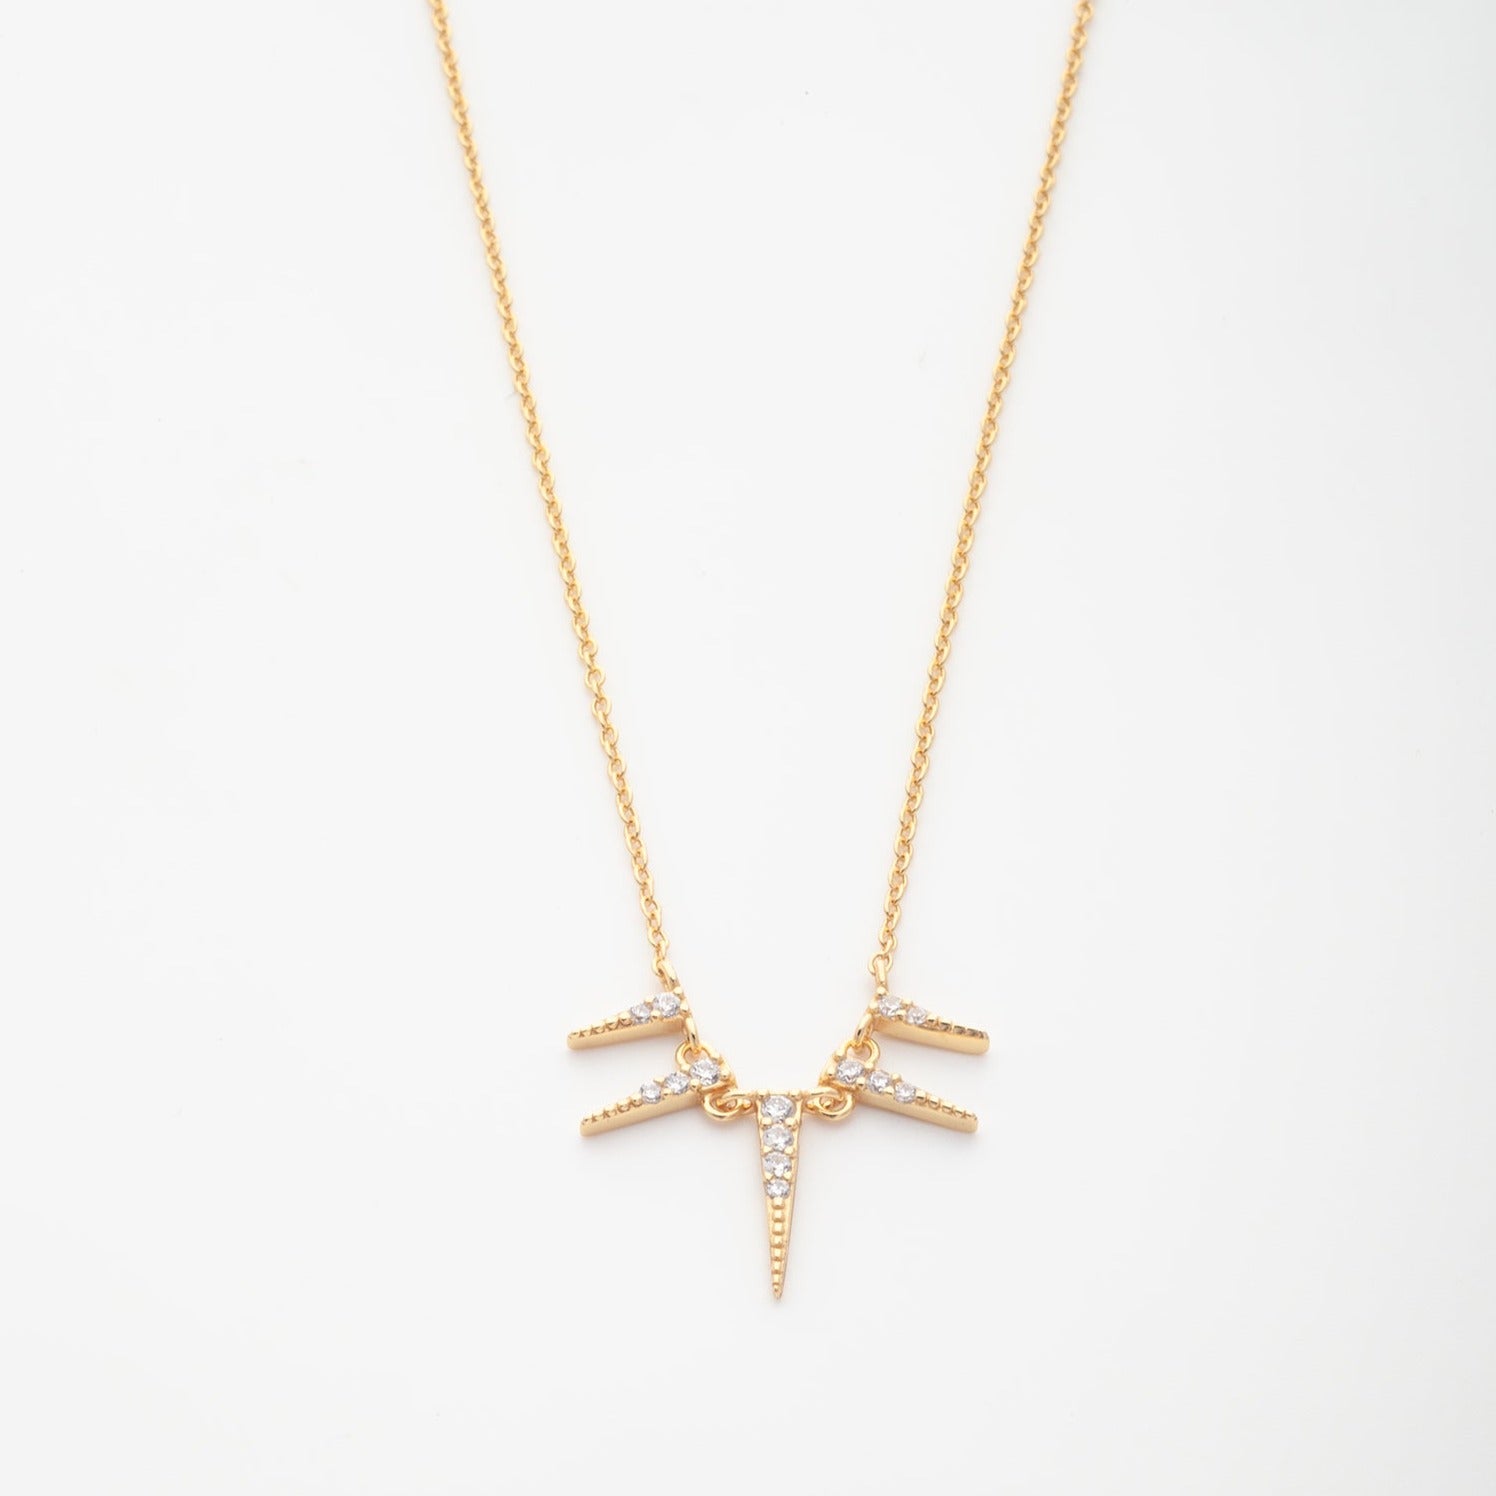 Spiked Pendant Necklace in Gold